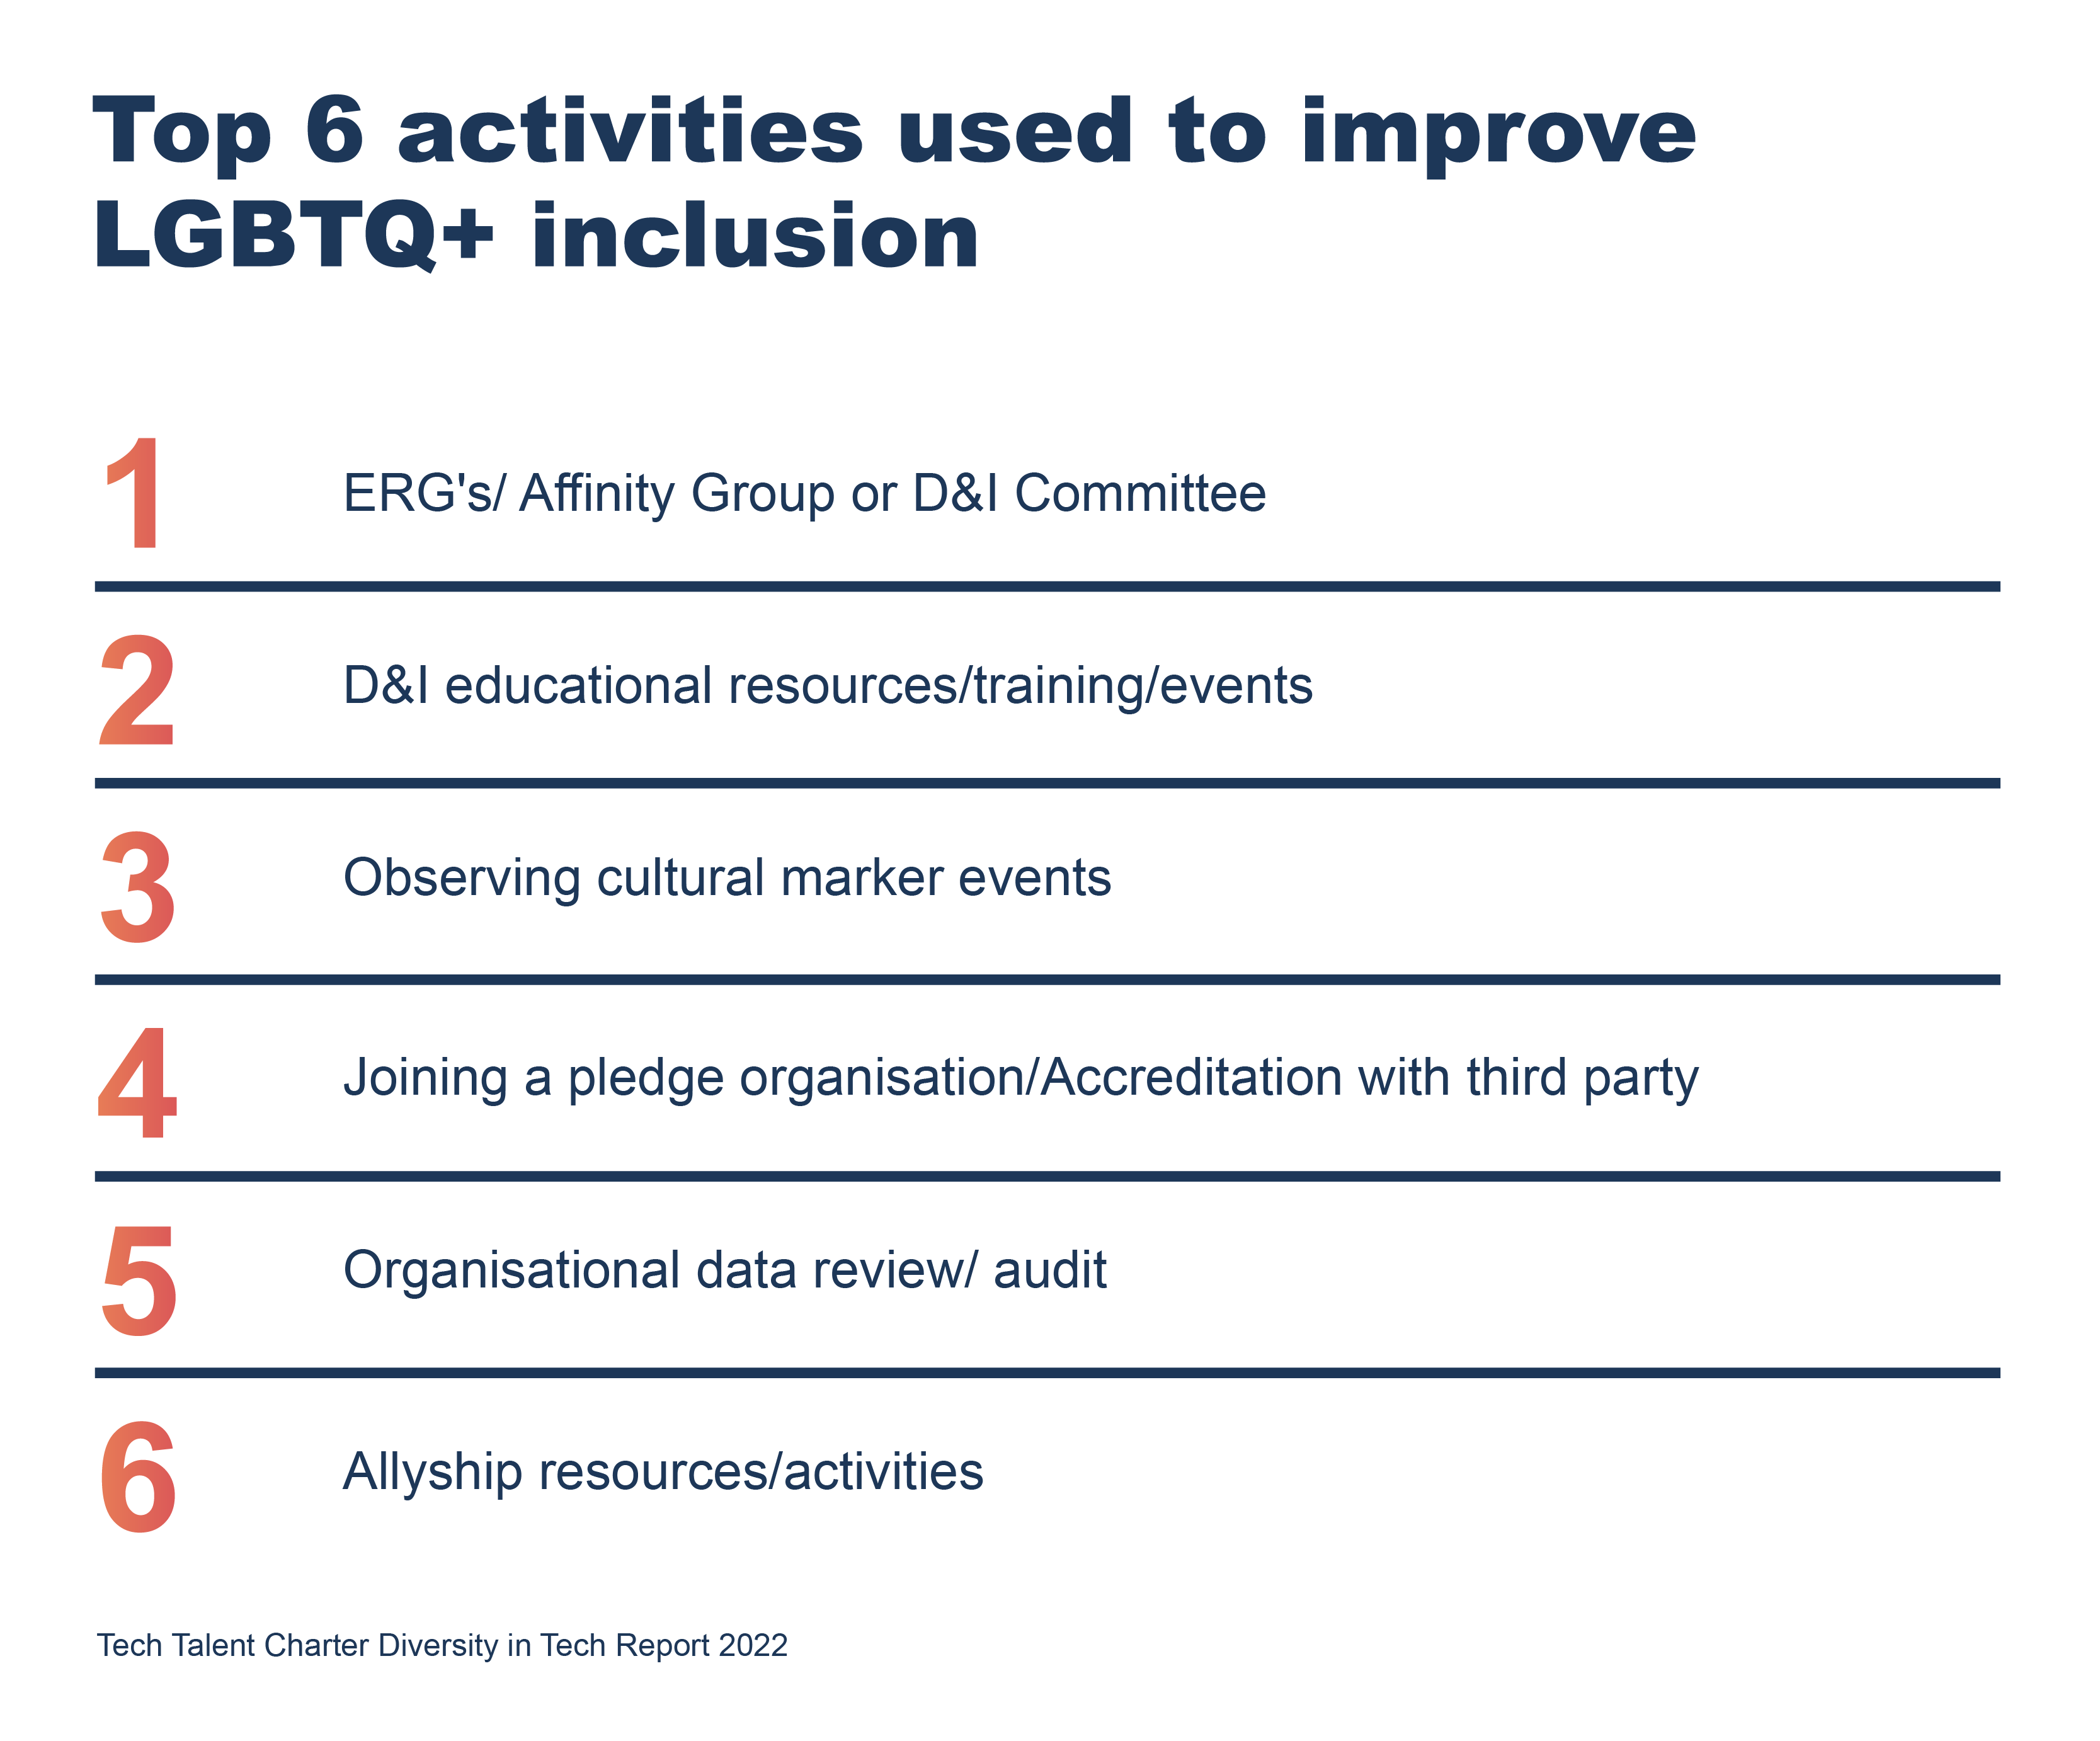 The top 6 activities used to improve LGBTQ+ inclusion